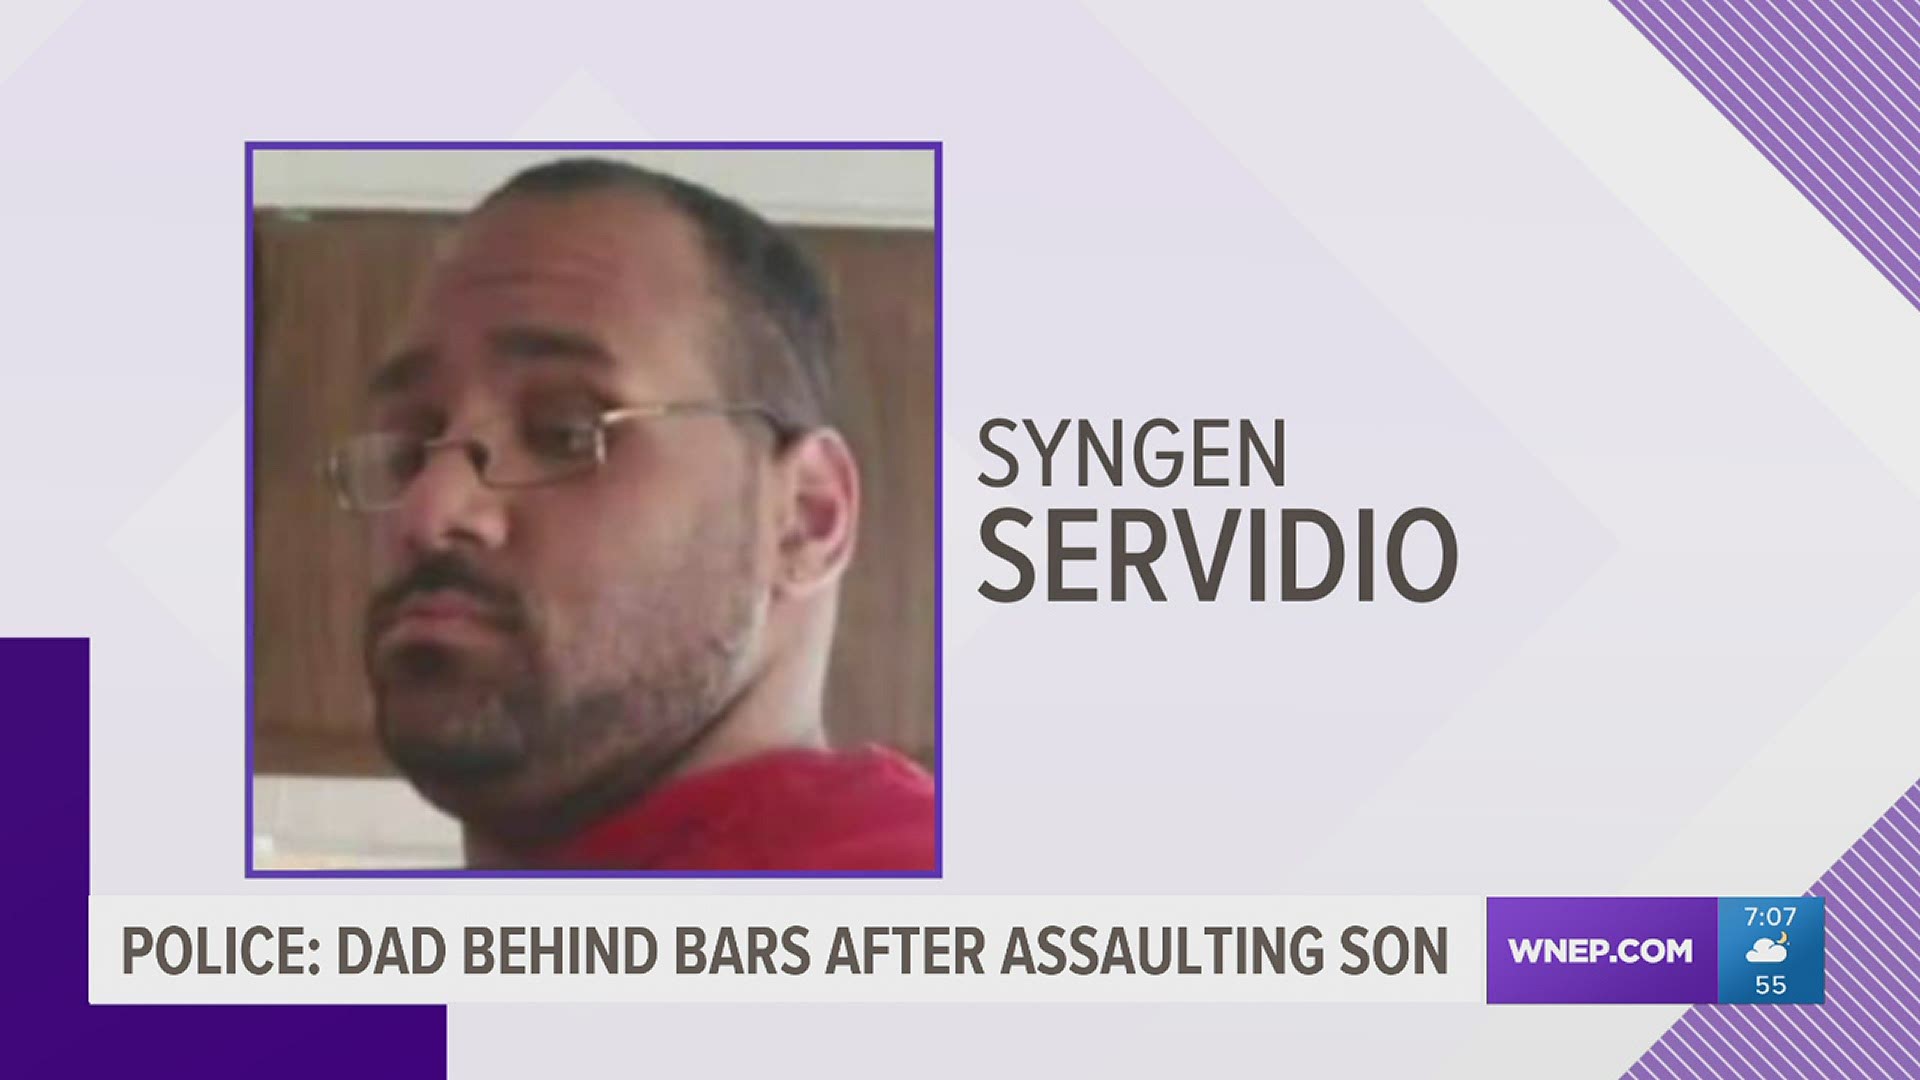 Syngen Servidio is charged with aggravated assault, reckless endangerment, and related offenses after allegedly assaulting his son who is only four years old.